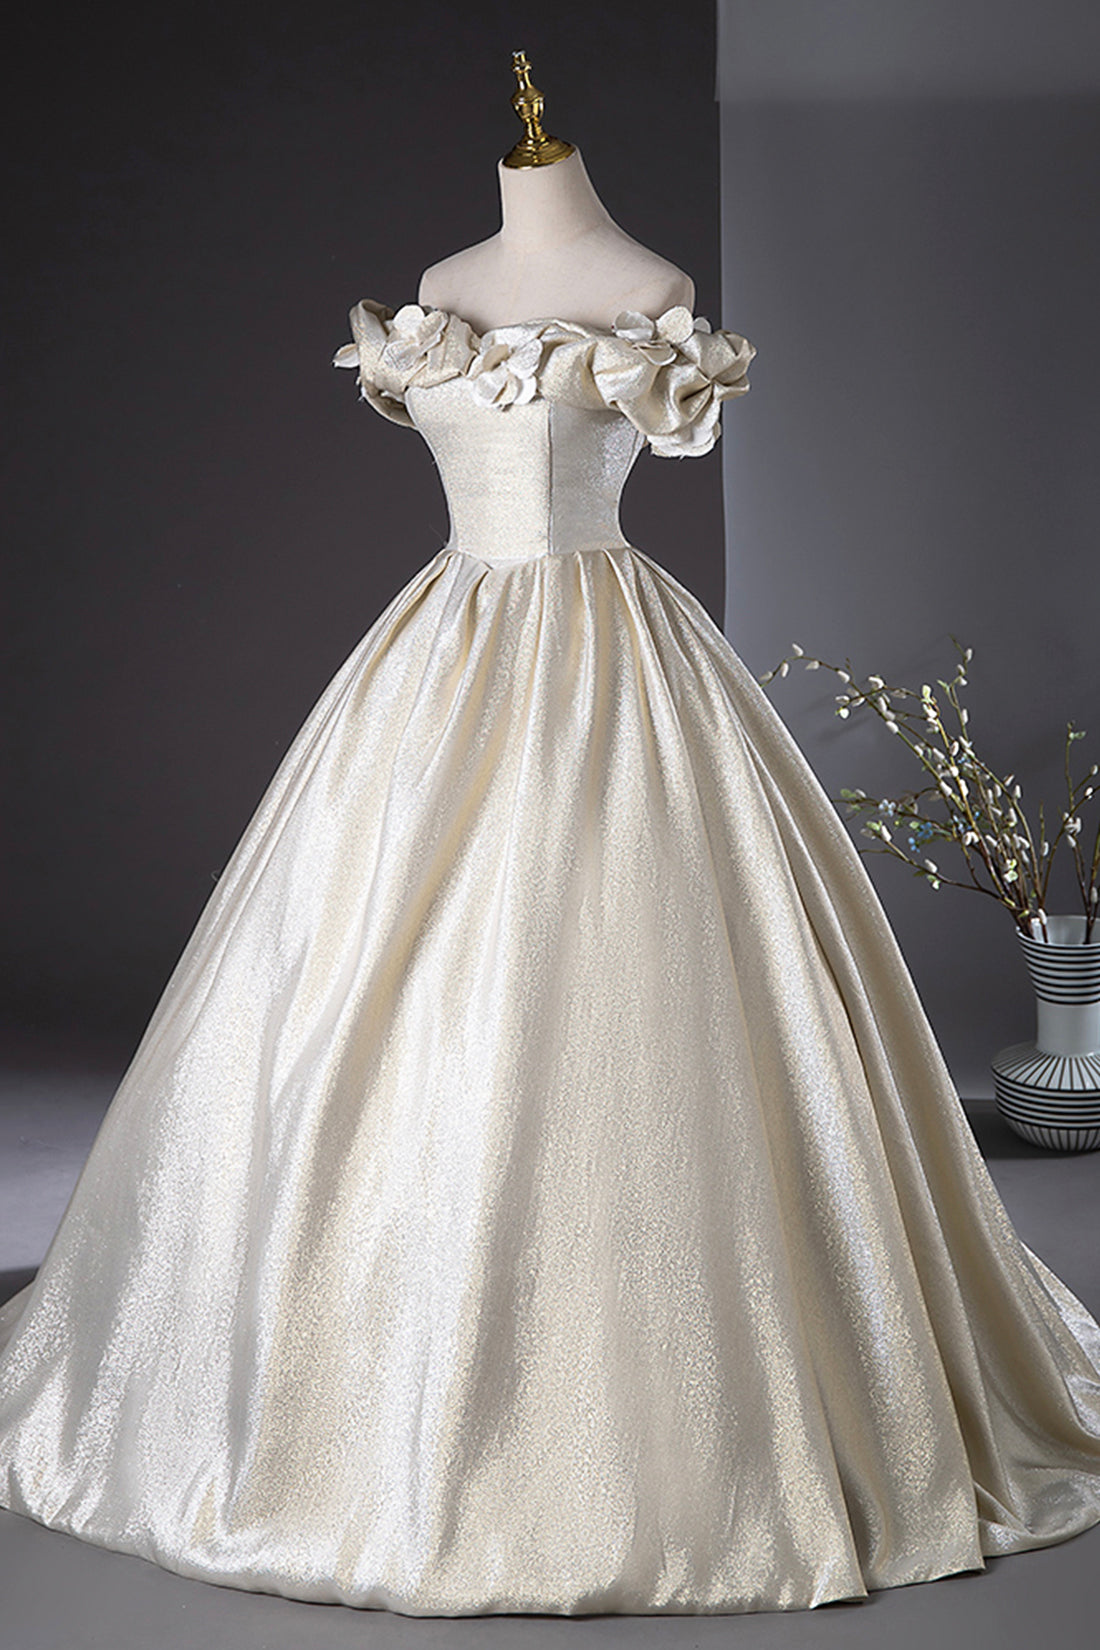 Champagne Satin Long Prom Dress, Beautiful A-Line Evening Party Dress